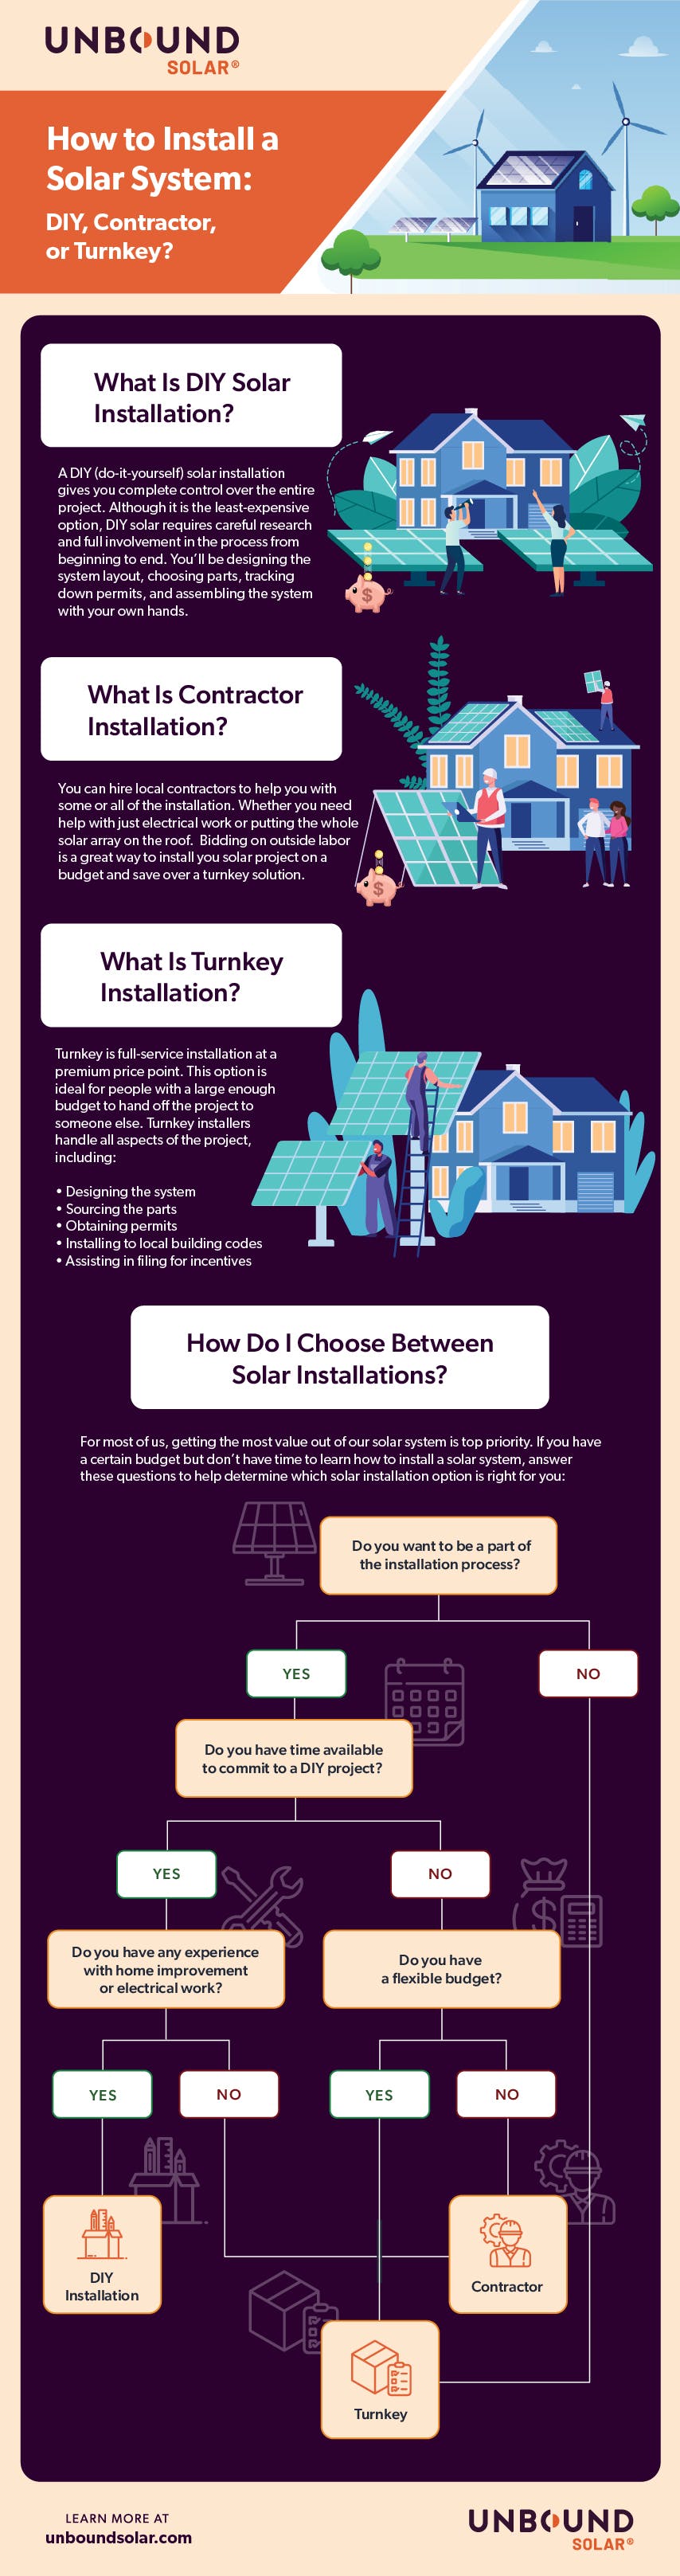 How to Install a Solar System: DIY, Contractor, or Turnkey? - Unbound Solar